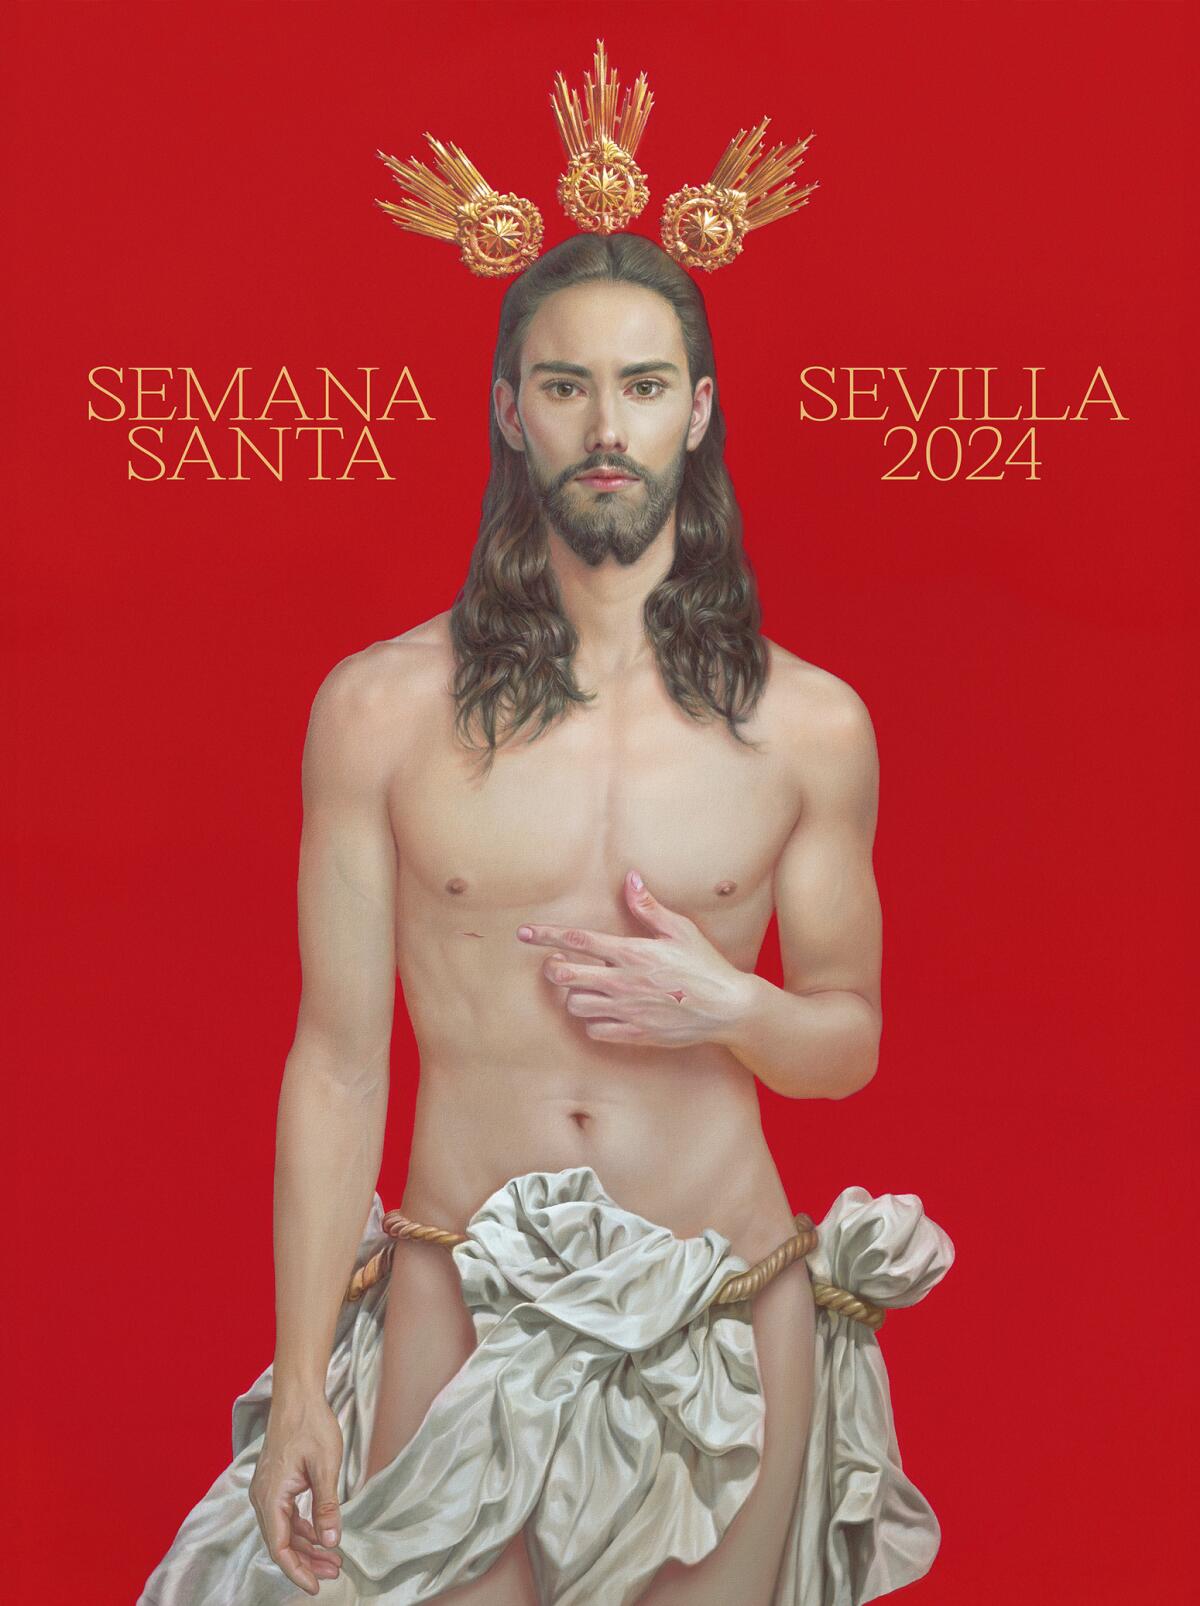 The Seville 2024 poster for the religious Easter Holy Week depicts a young, handsome Jesus wearing a shroud as loincloth. 